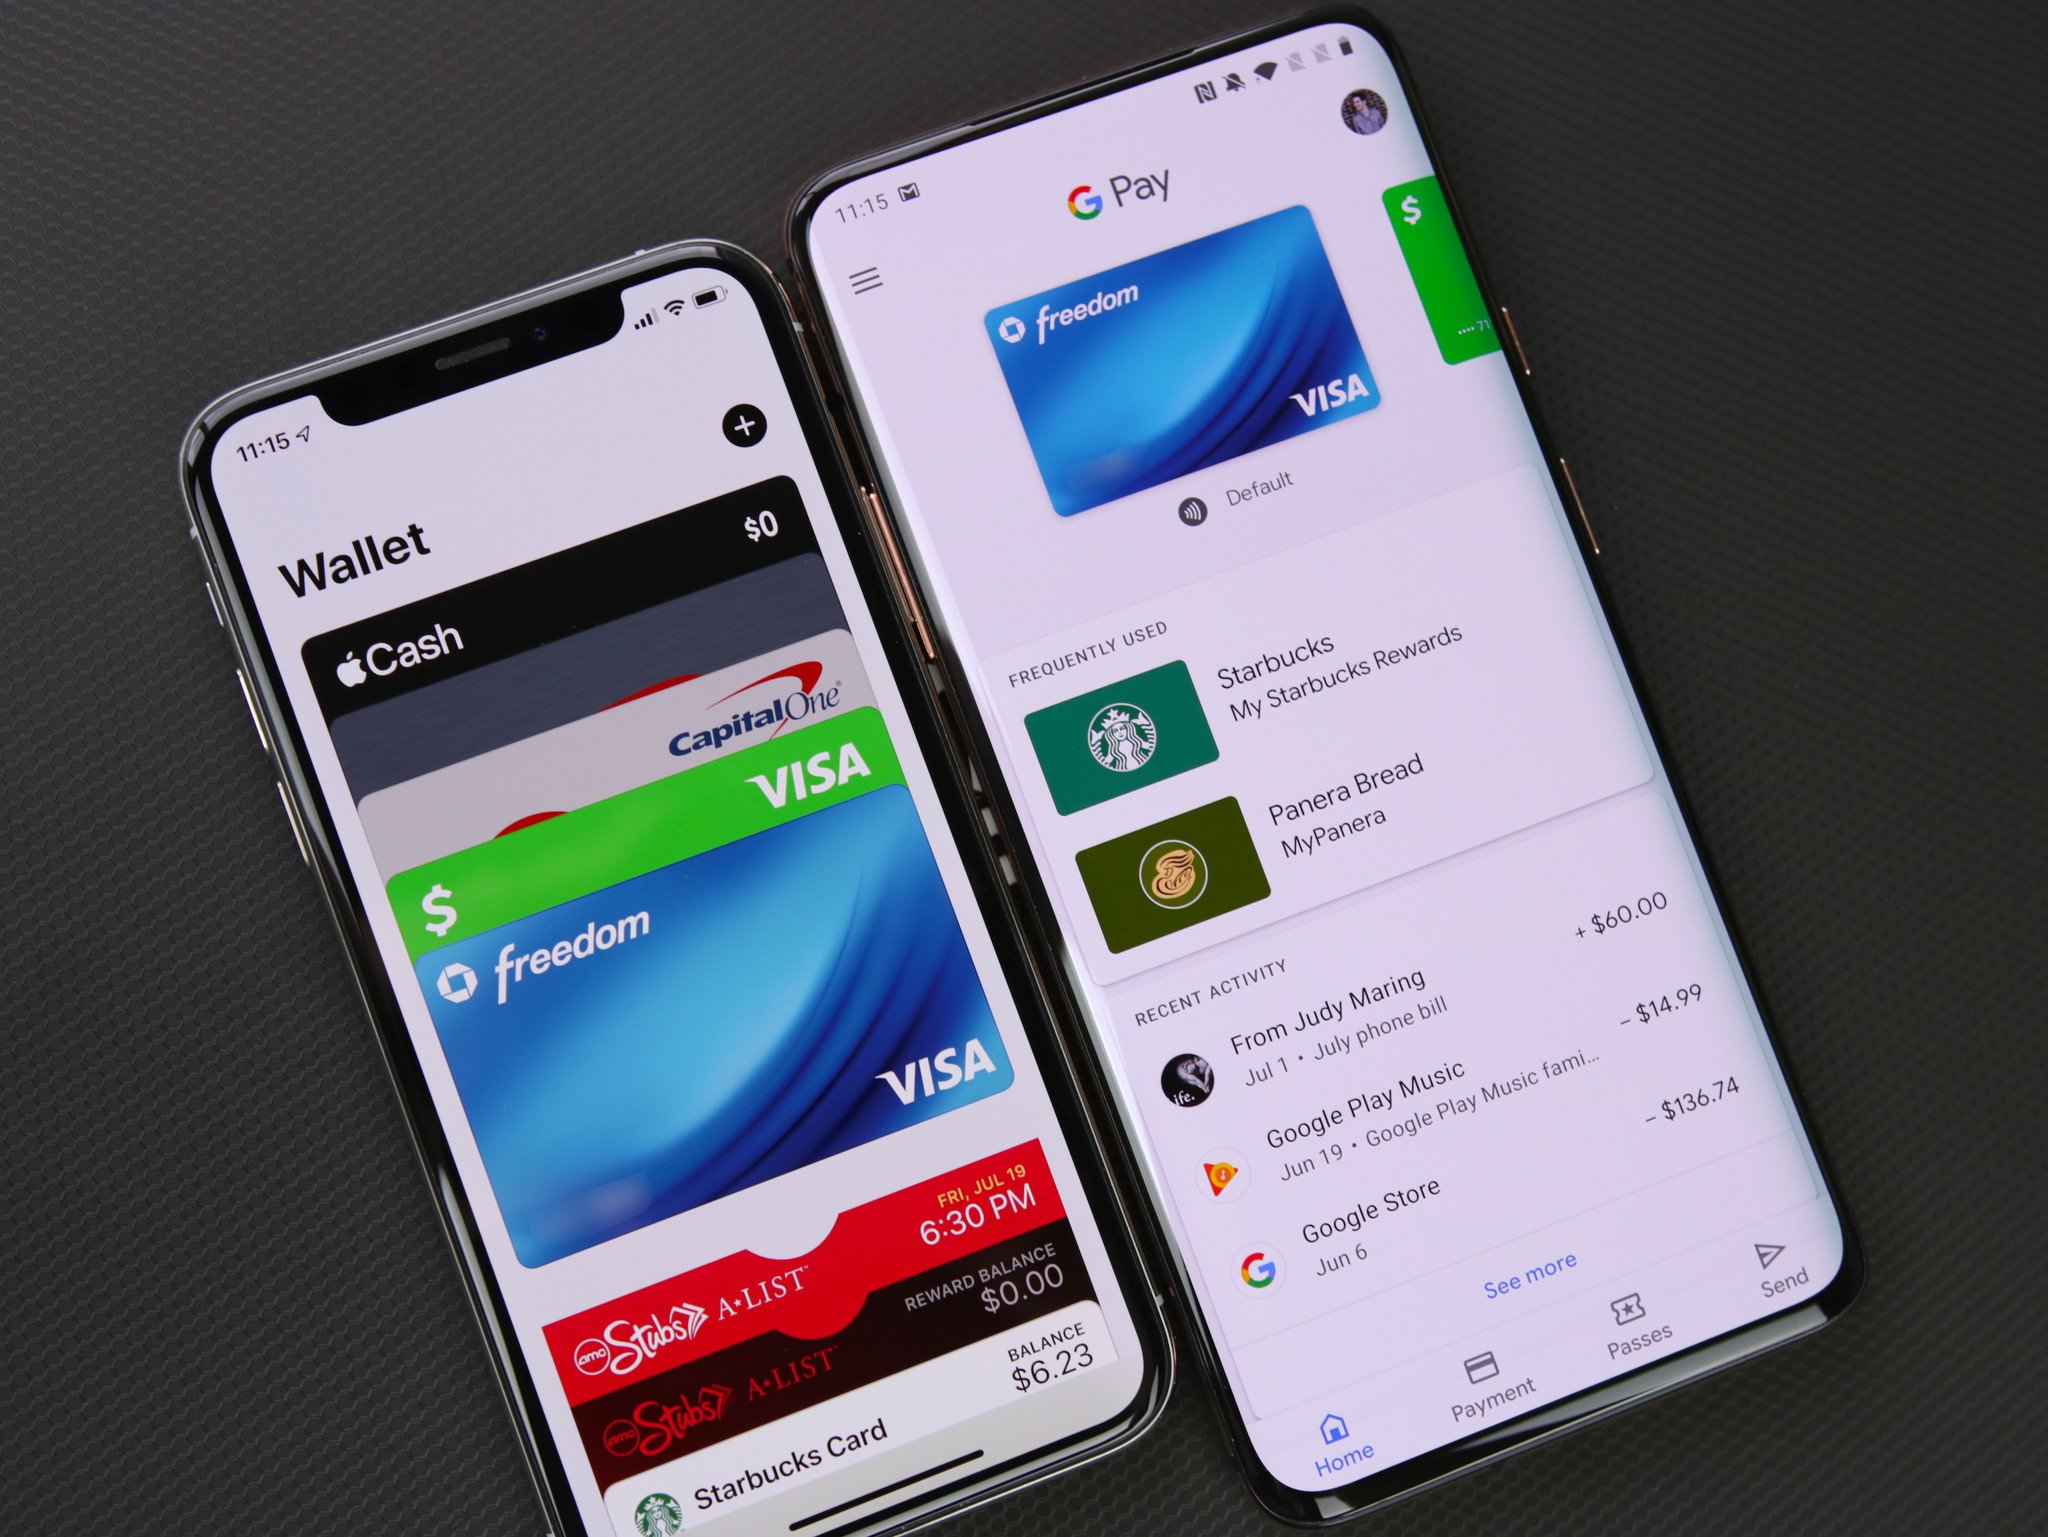 Google Pay and Apple Pay